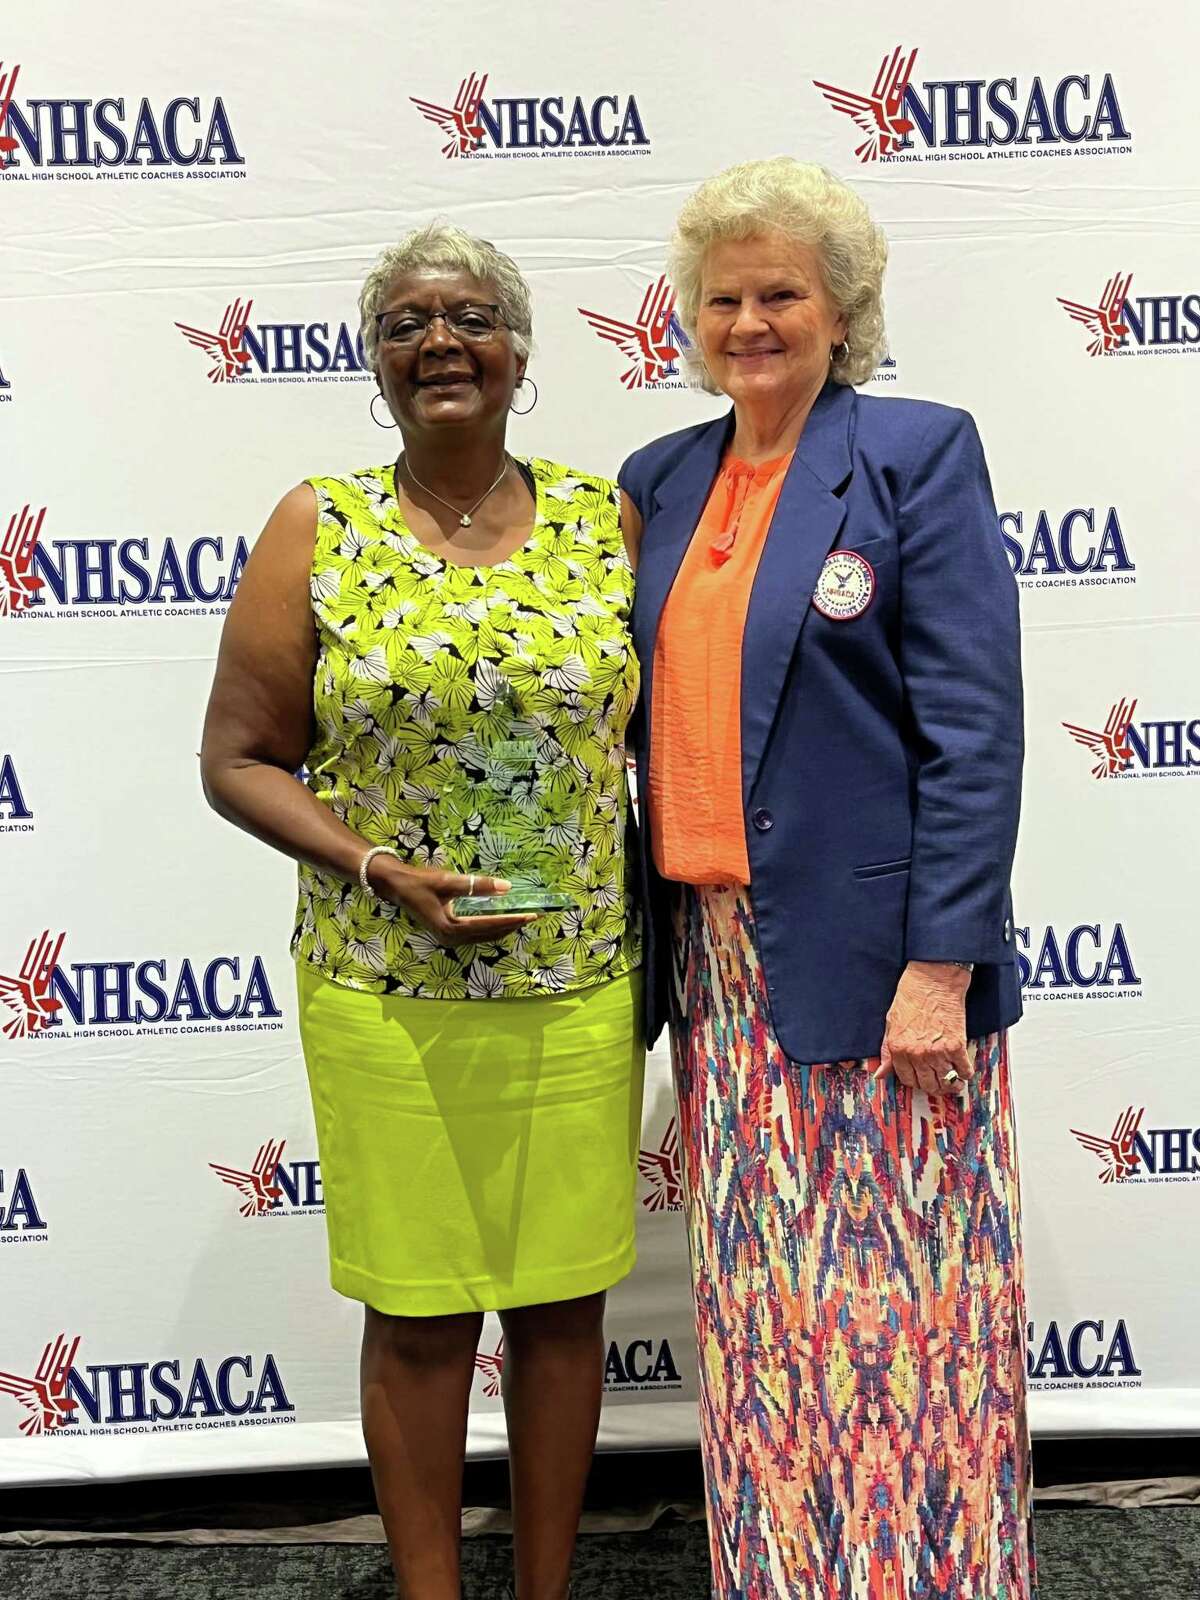 Deb Petruzzello, left, with Kathy Holloway after receiving the Kathy Holloway Women of Inspiration Award at the National High School Athletic Coaches Association convention last month in Iowa.